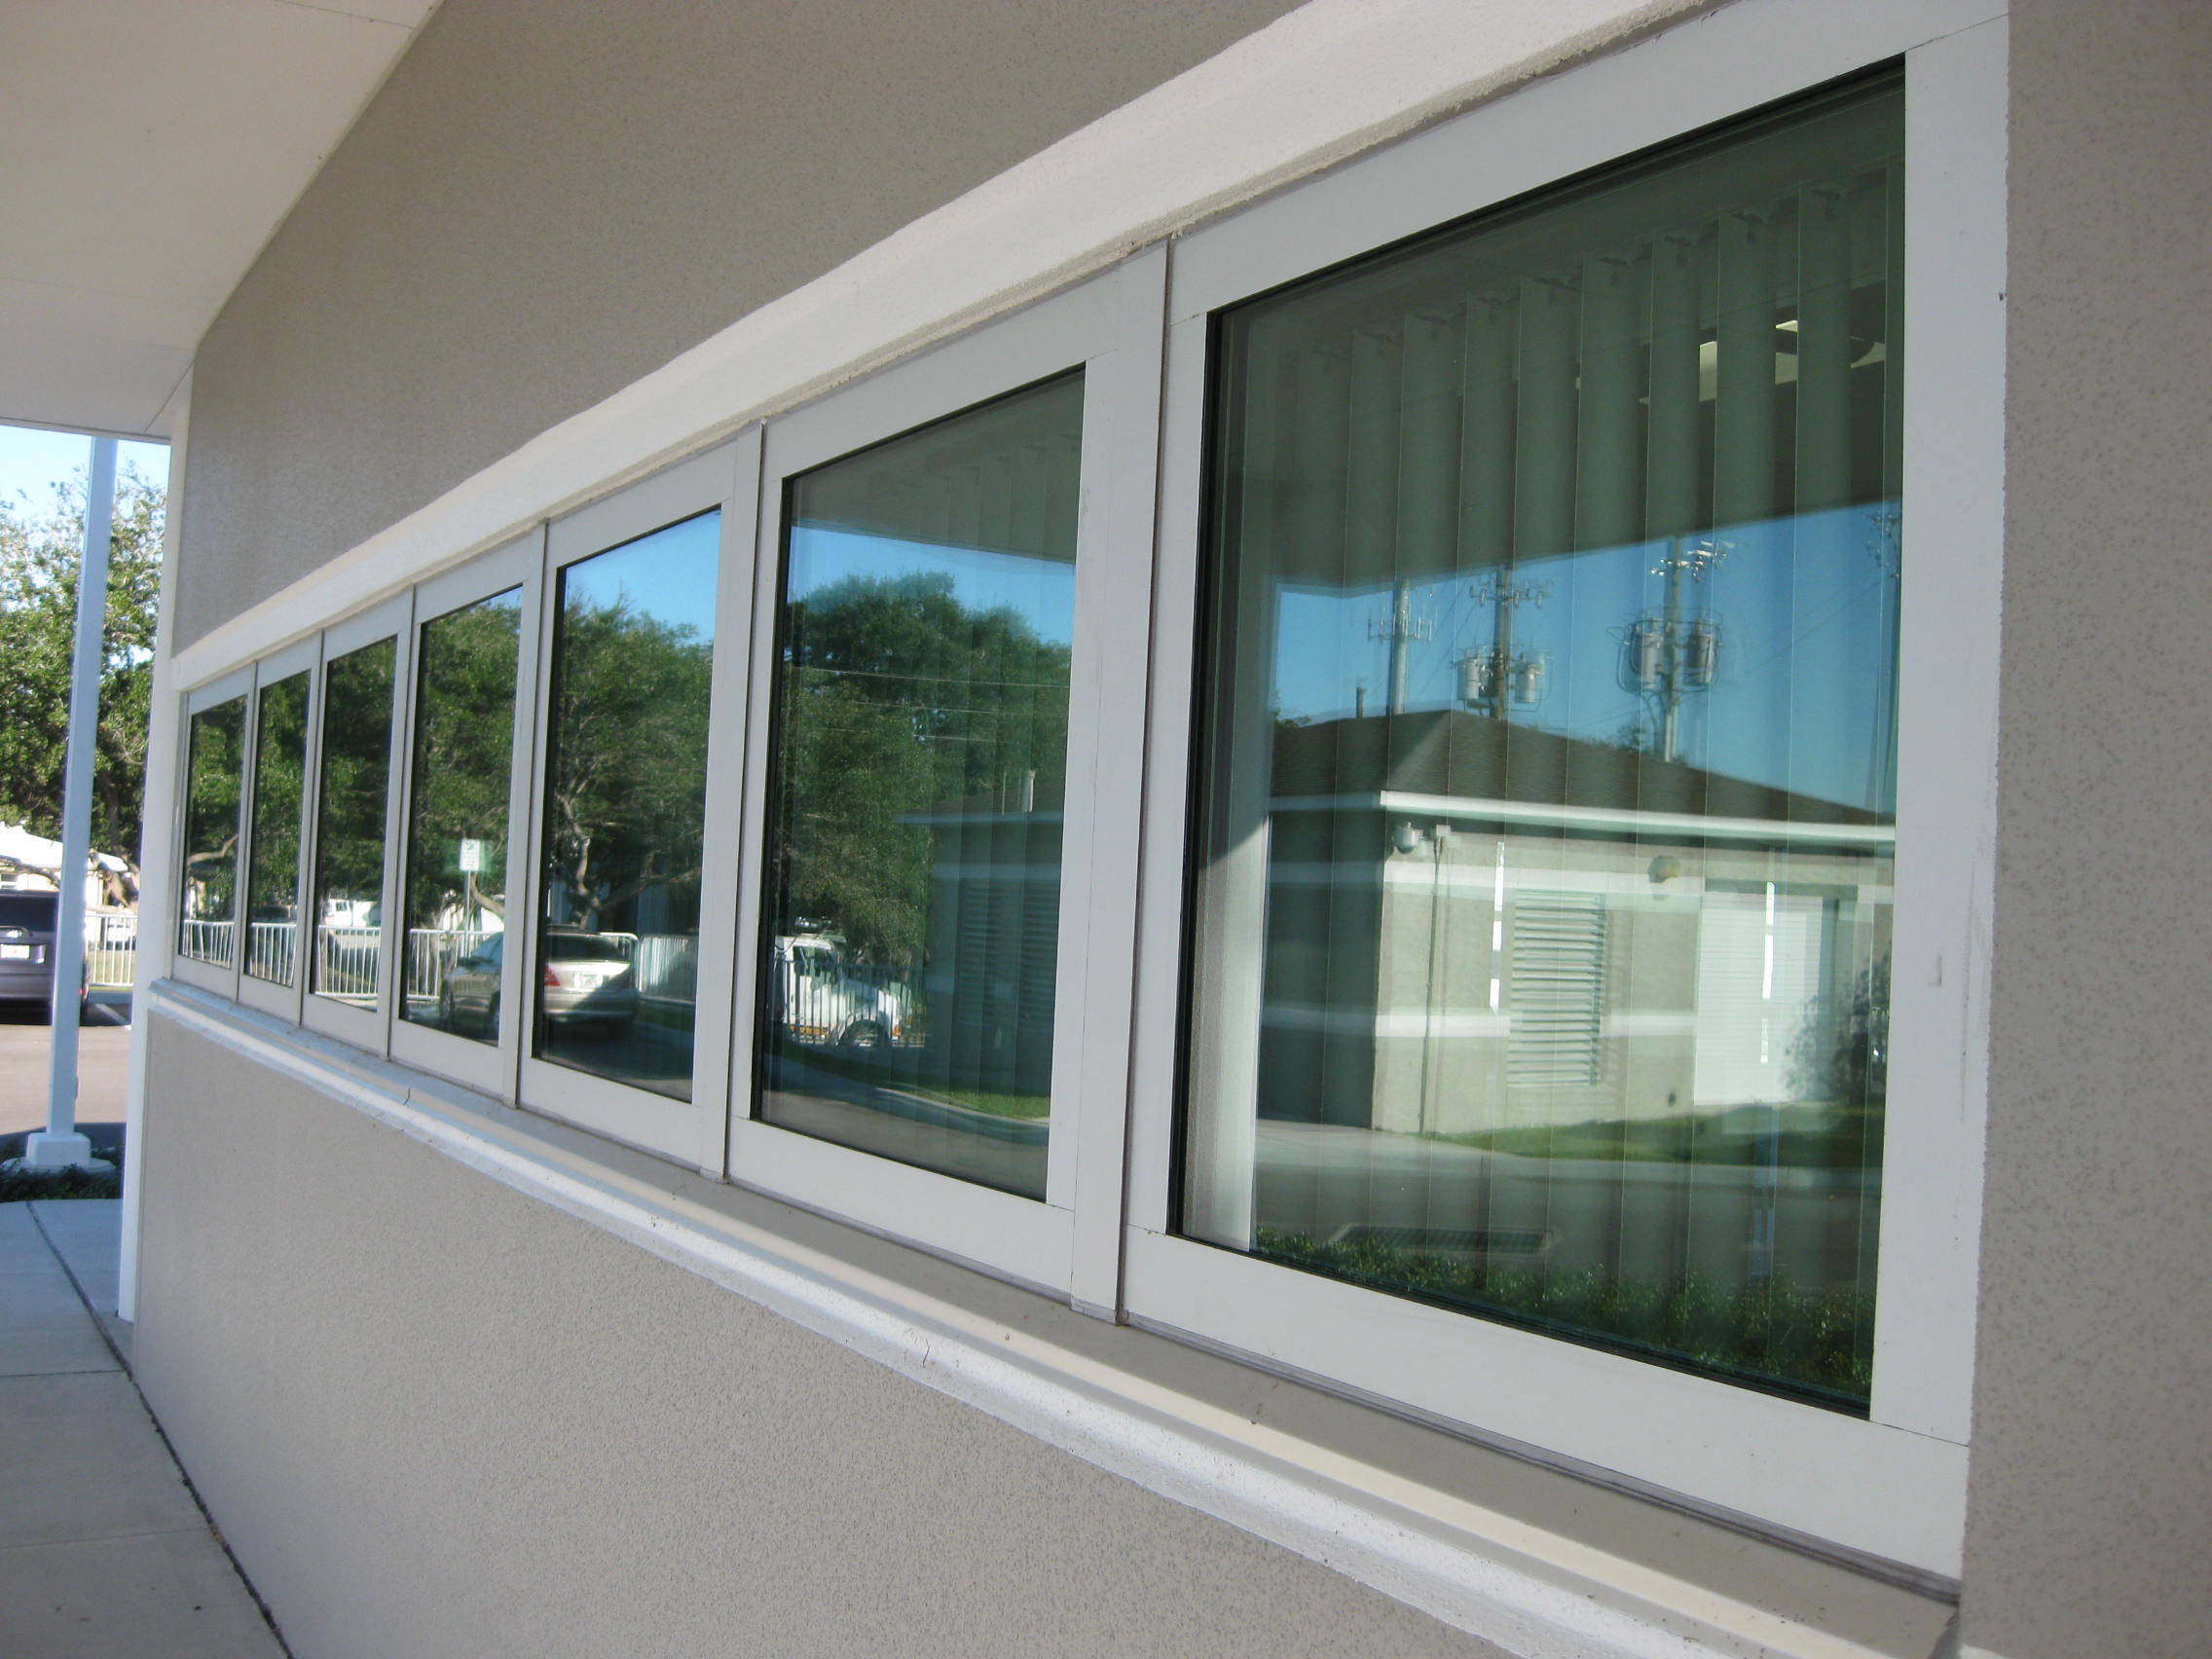 Fixed Windows Designed for Performance